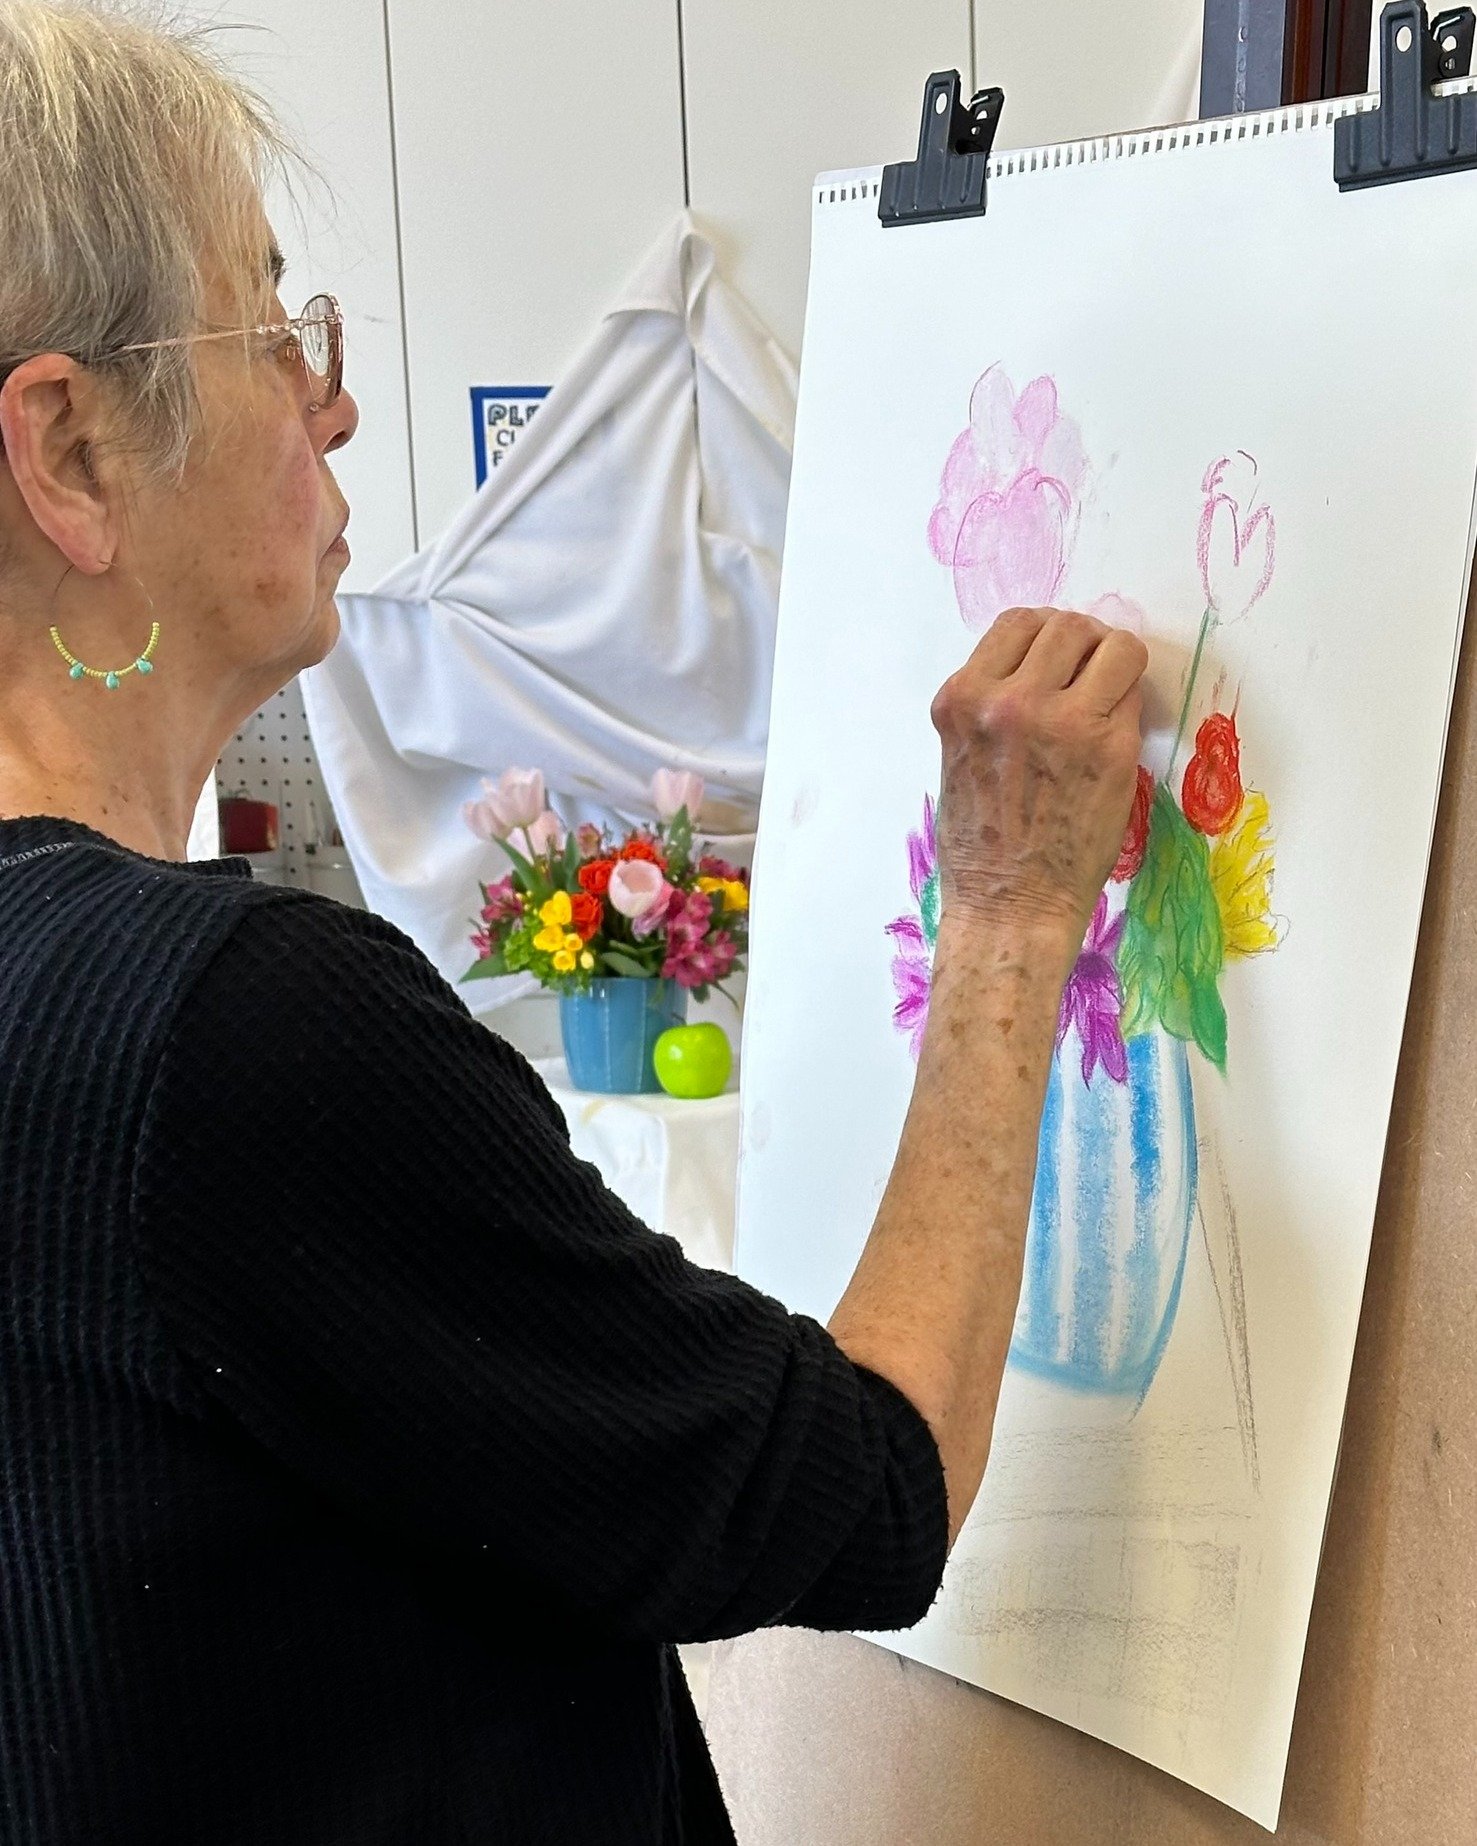 Unlock your drawing potential this spring! 🌷👩&zwj;🎨

Join us in the printmaking studio for Drawing Fundamentals&mdash;develop your skills, from understanding line and value to exploring creativity through still life and abstraction. Sign up now to